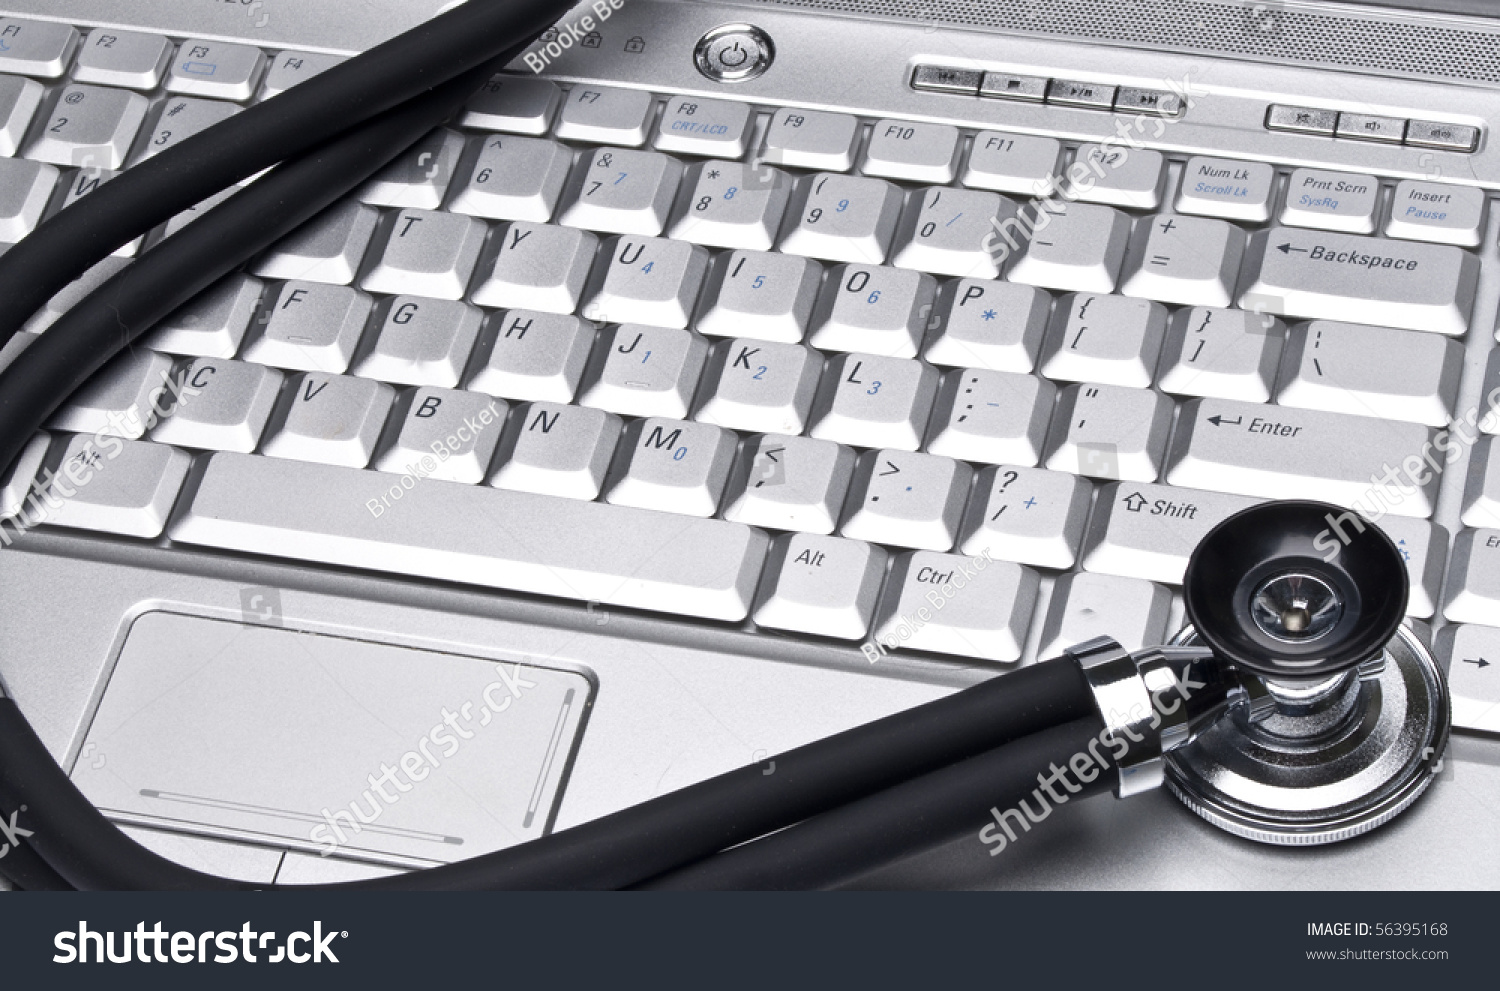 Medical Records Conceptual Image with Stethoscope and Laptop Computer. #56395168